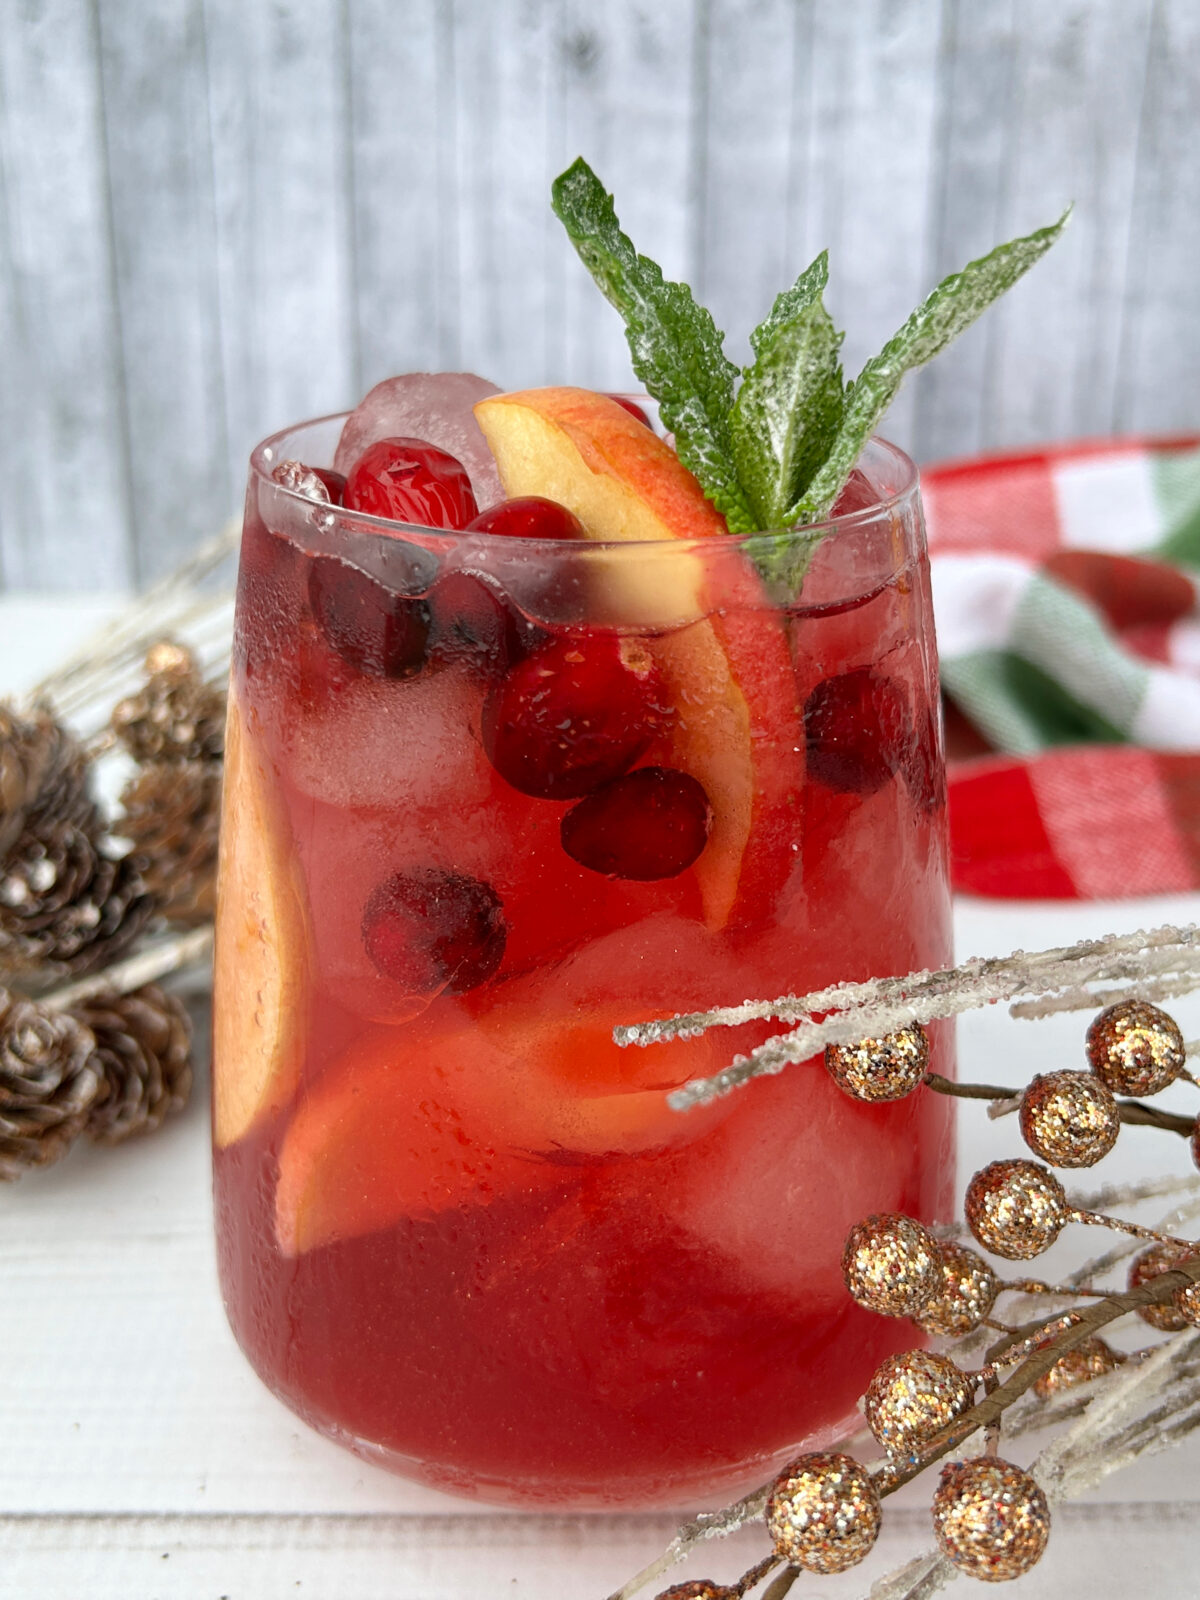 Looking for a perfect festive drink to serve this holiday season? Check out this easy, delicious recipe for Christmas bourbon punch!